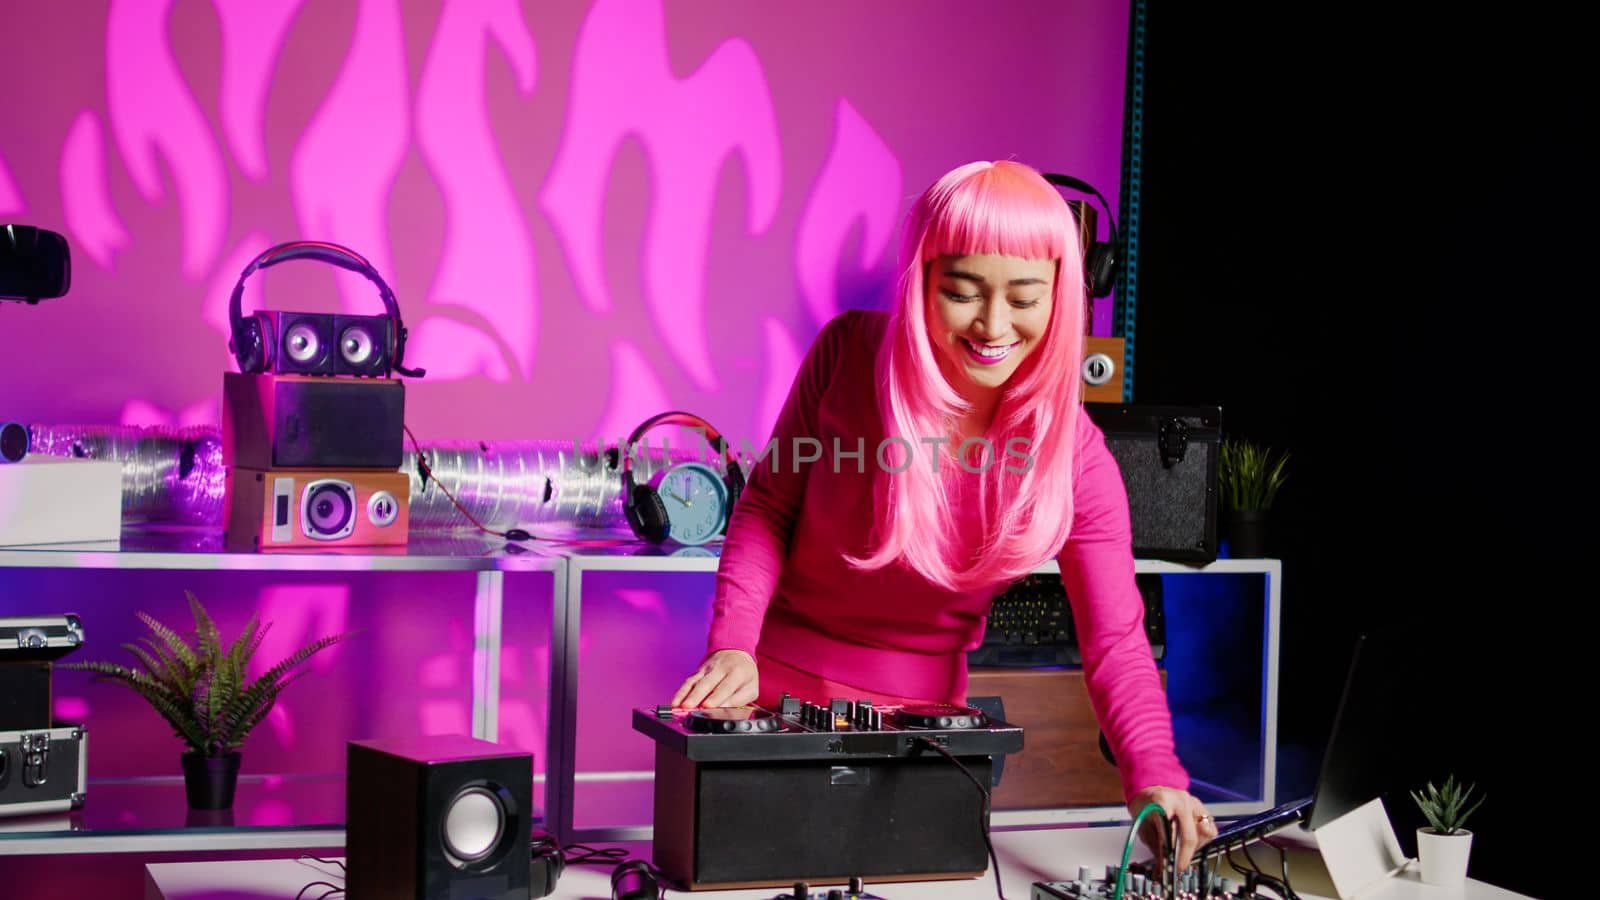 Smiling musician working as dj playing at mixer console, mixing techno sound with eletronic using audio equipment. Performer with pink hair having fun performing in club at night time